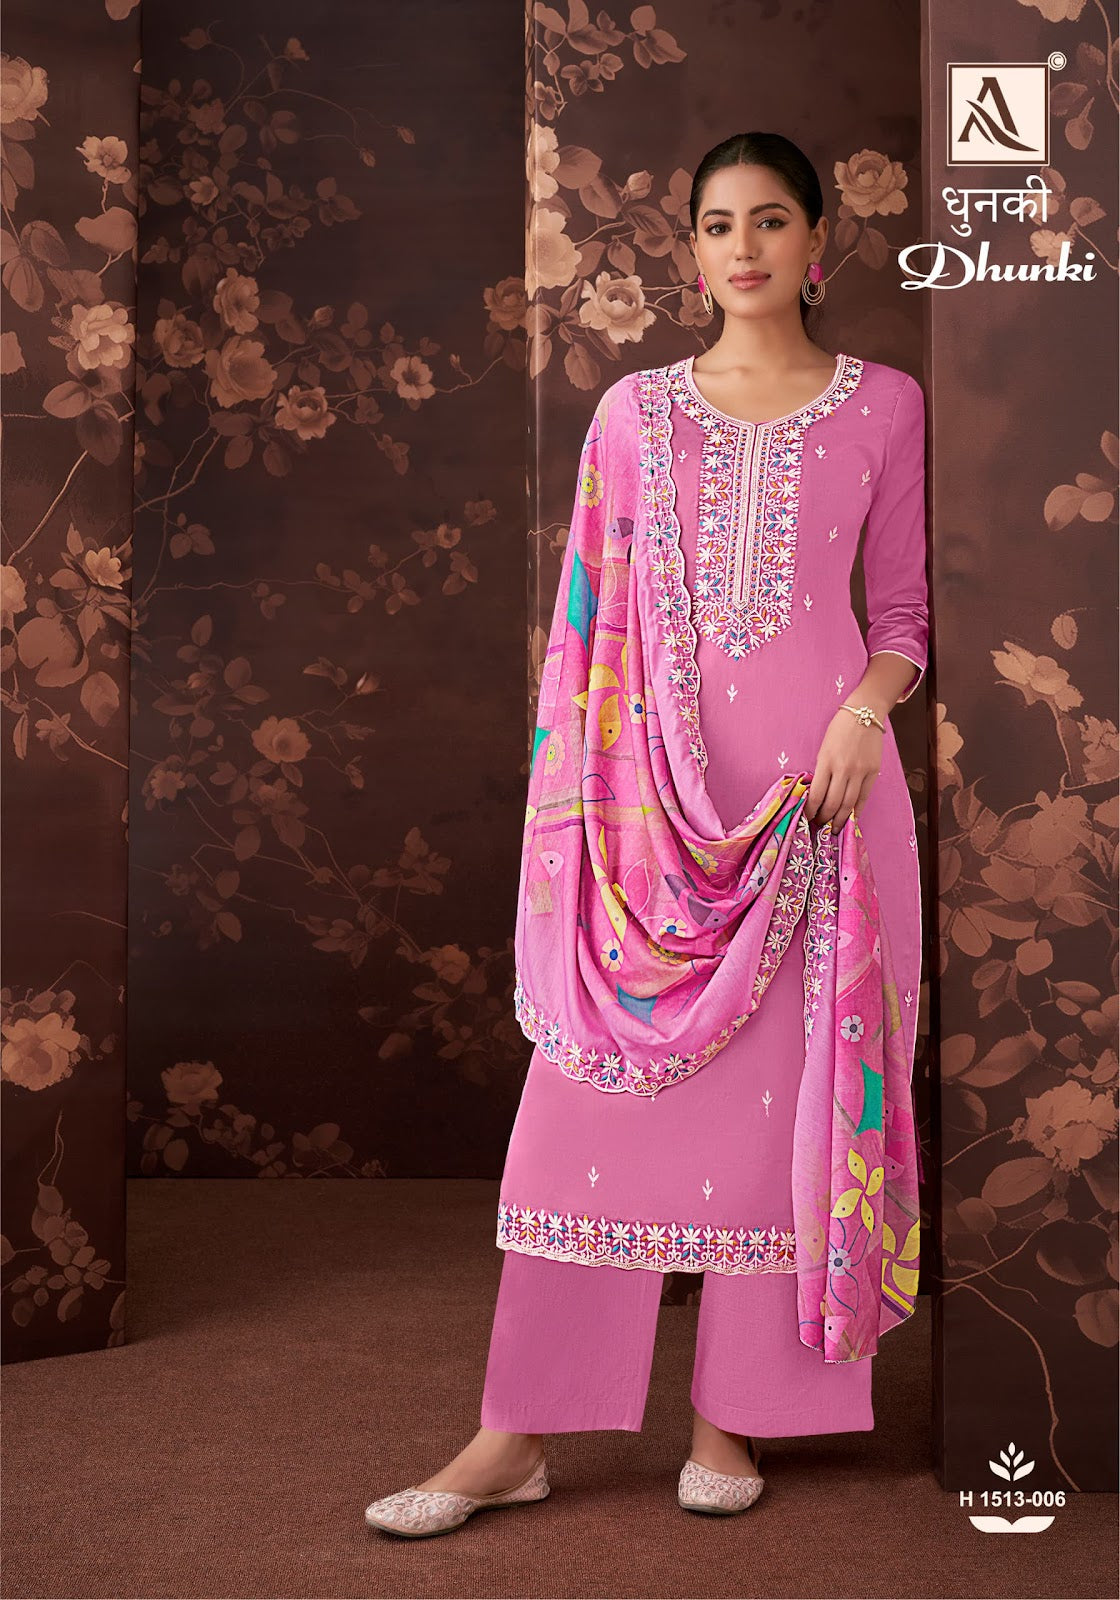 Dhunki Alok Jaam Cotton Pant Style Suits Supplier